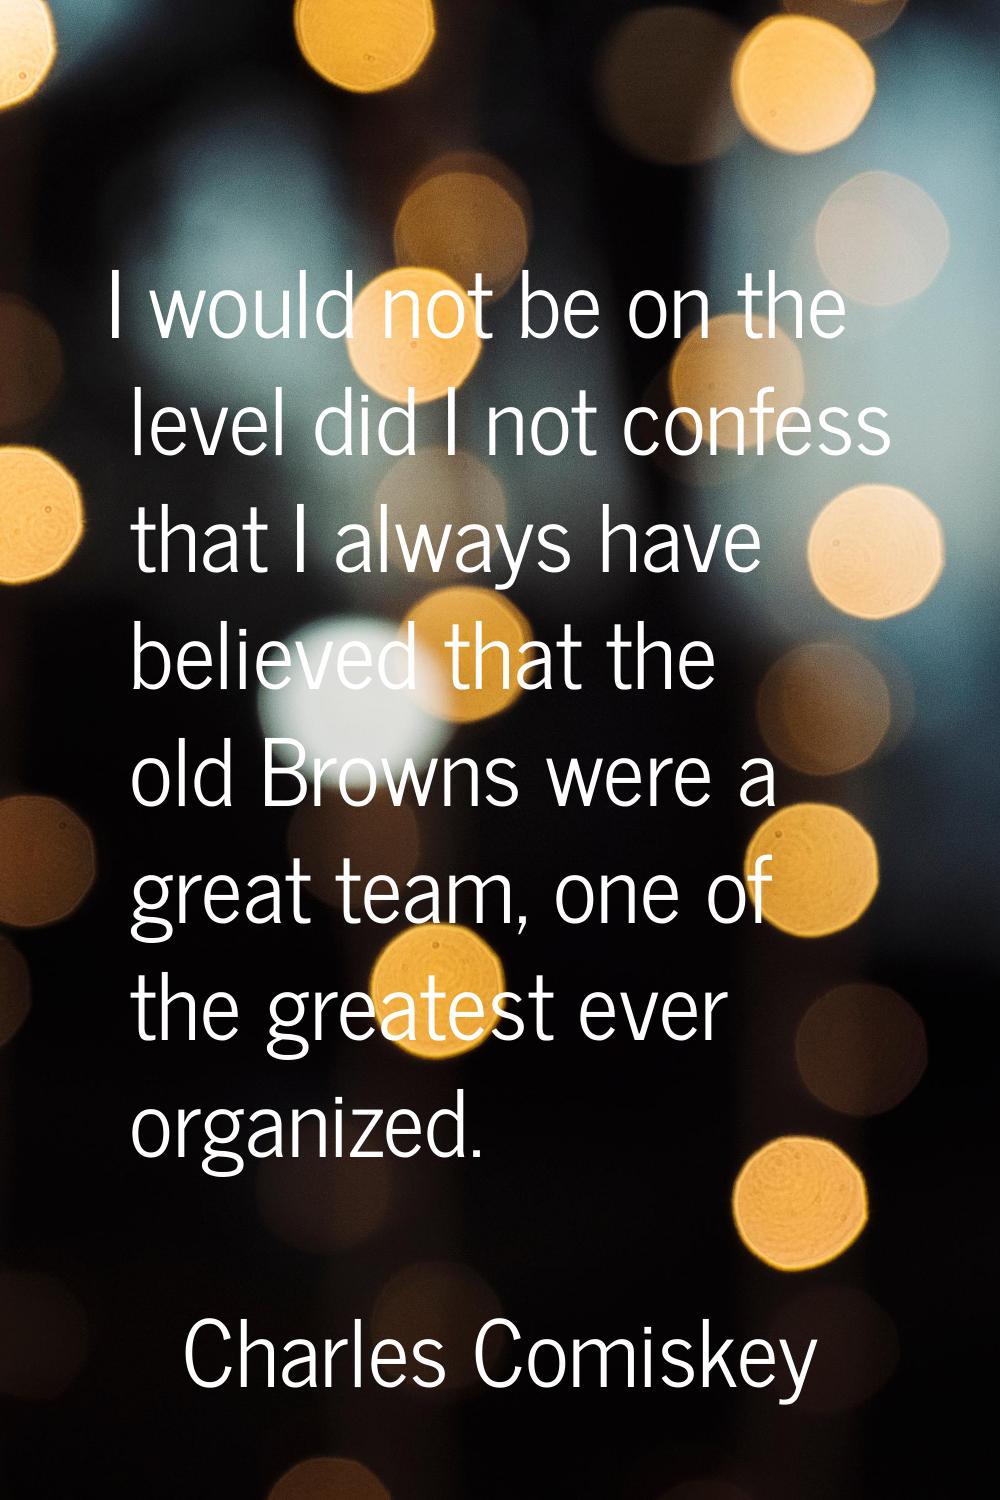 I would not be on the level did I not confess that I always have believed that the old Browns were 